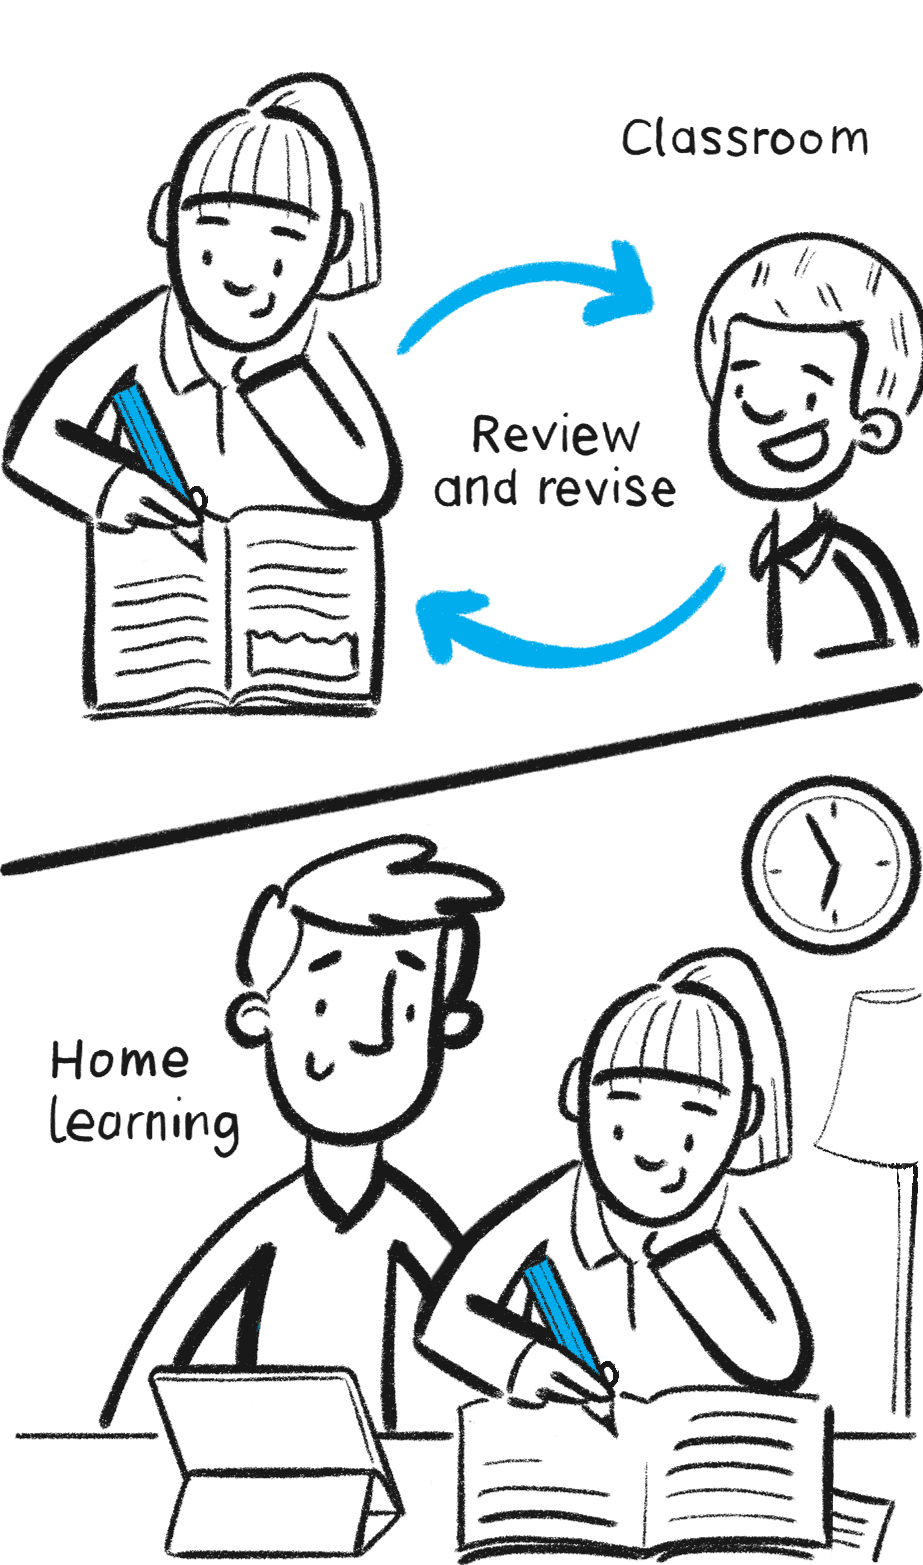 Review and revise in the classroom or as part of home learning.